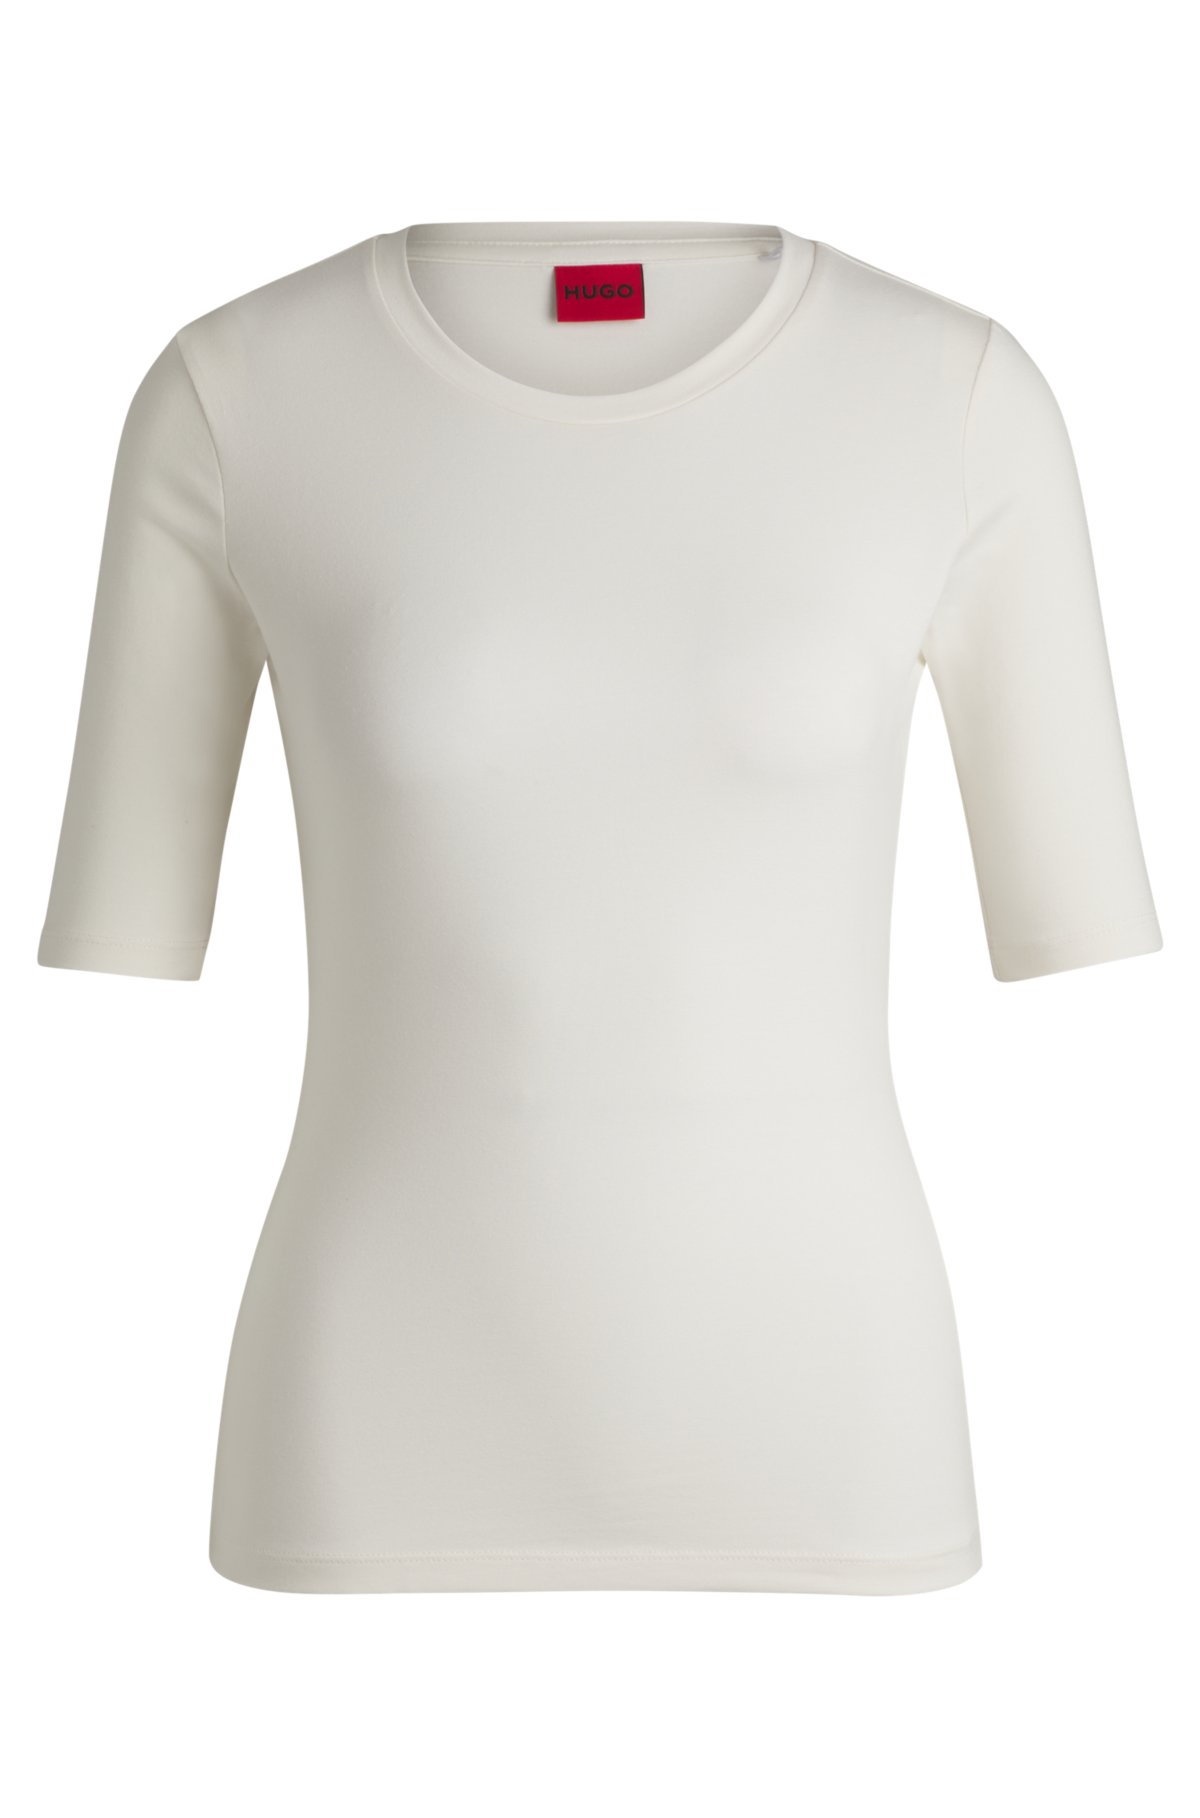 Slim-fit T-shirt in cotton, modal and stretch, White